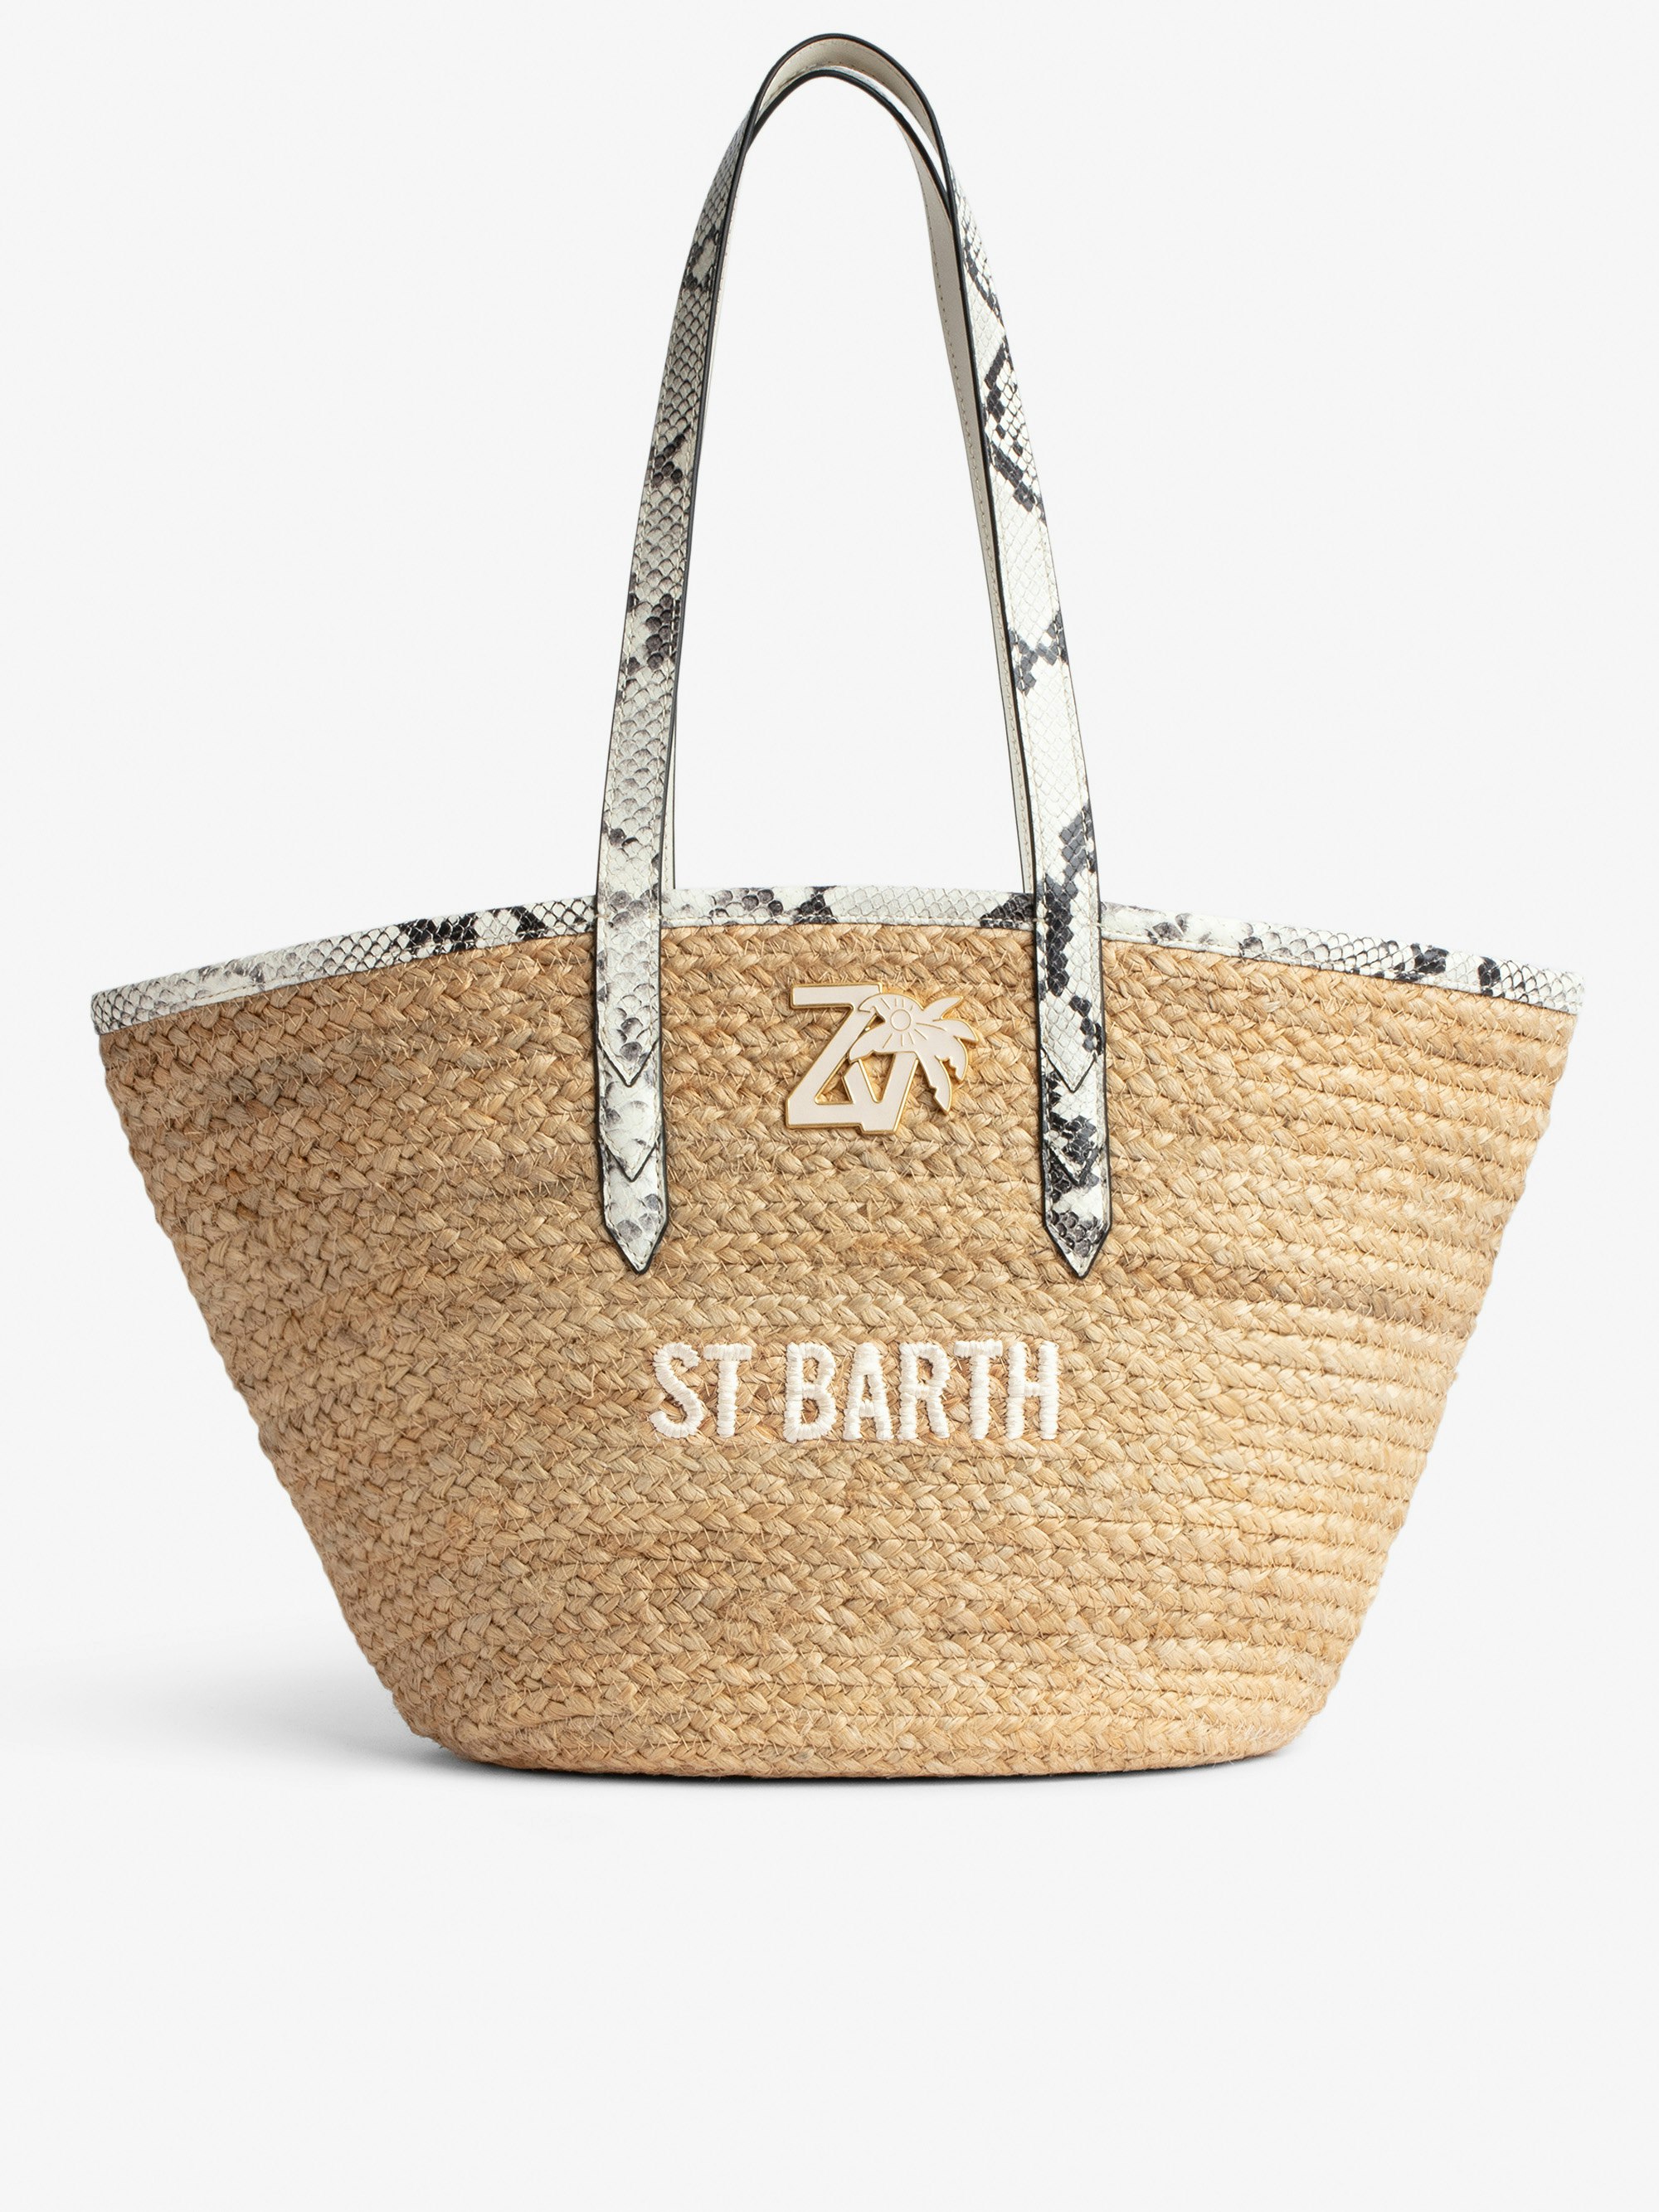 Le Beach Bag - Women's straw bag with off-white snakeskin-effect leather handles, "St Barth" embroidery and ZV charm